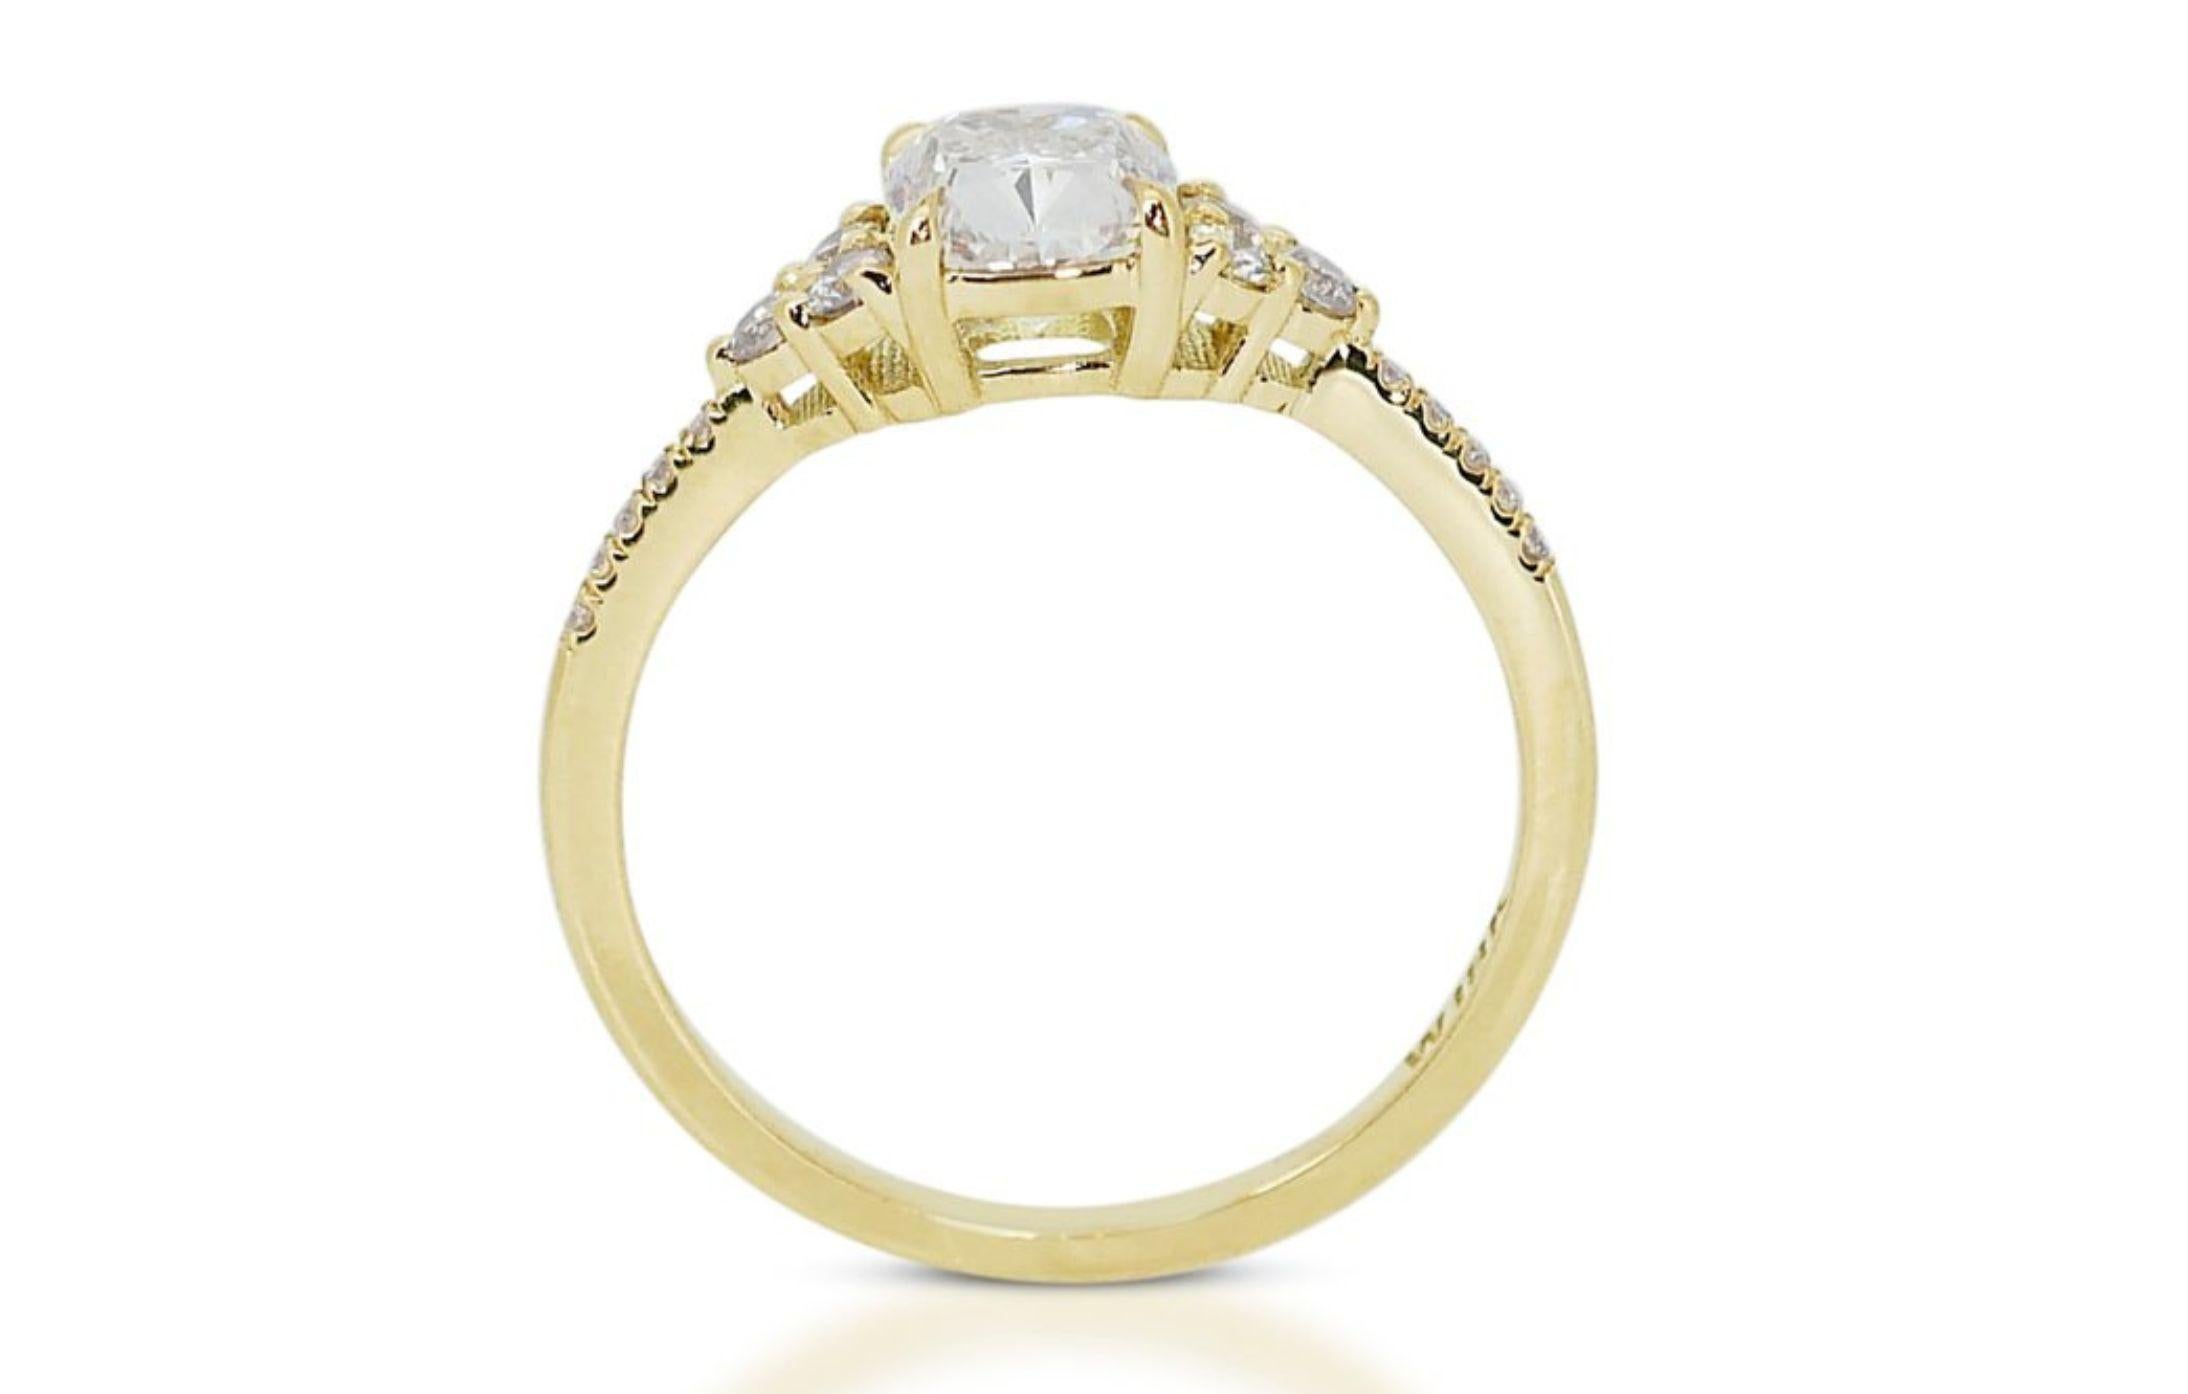 18K Yellow Gold Pave Diamond Ring with a Captivating 1.01ct Cushion-cut Diamond 2